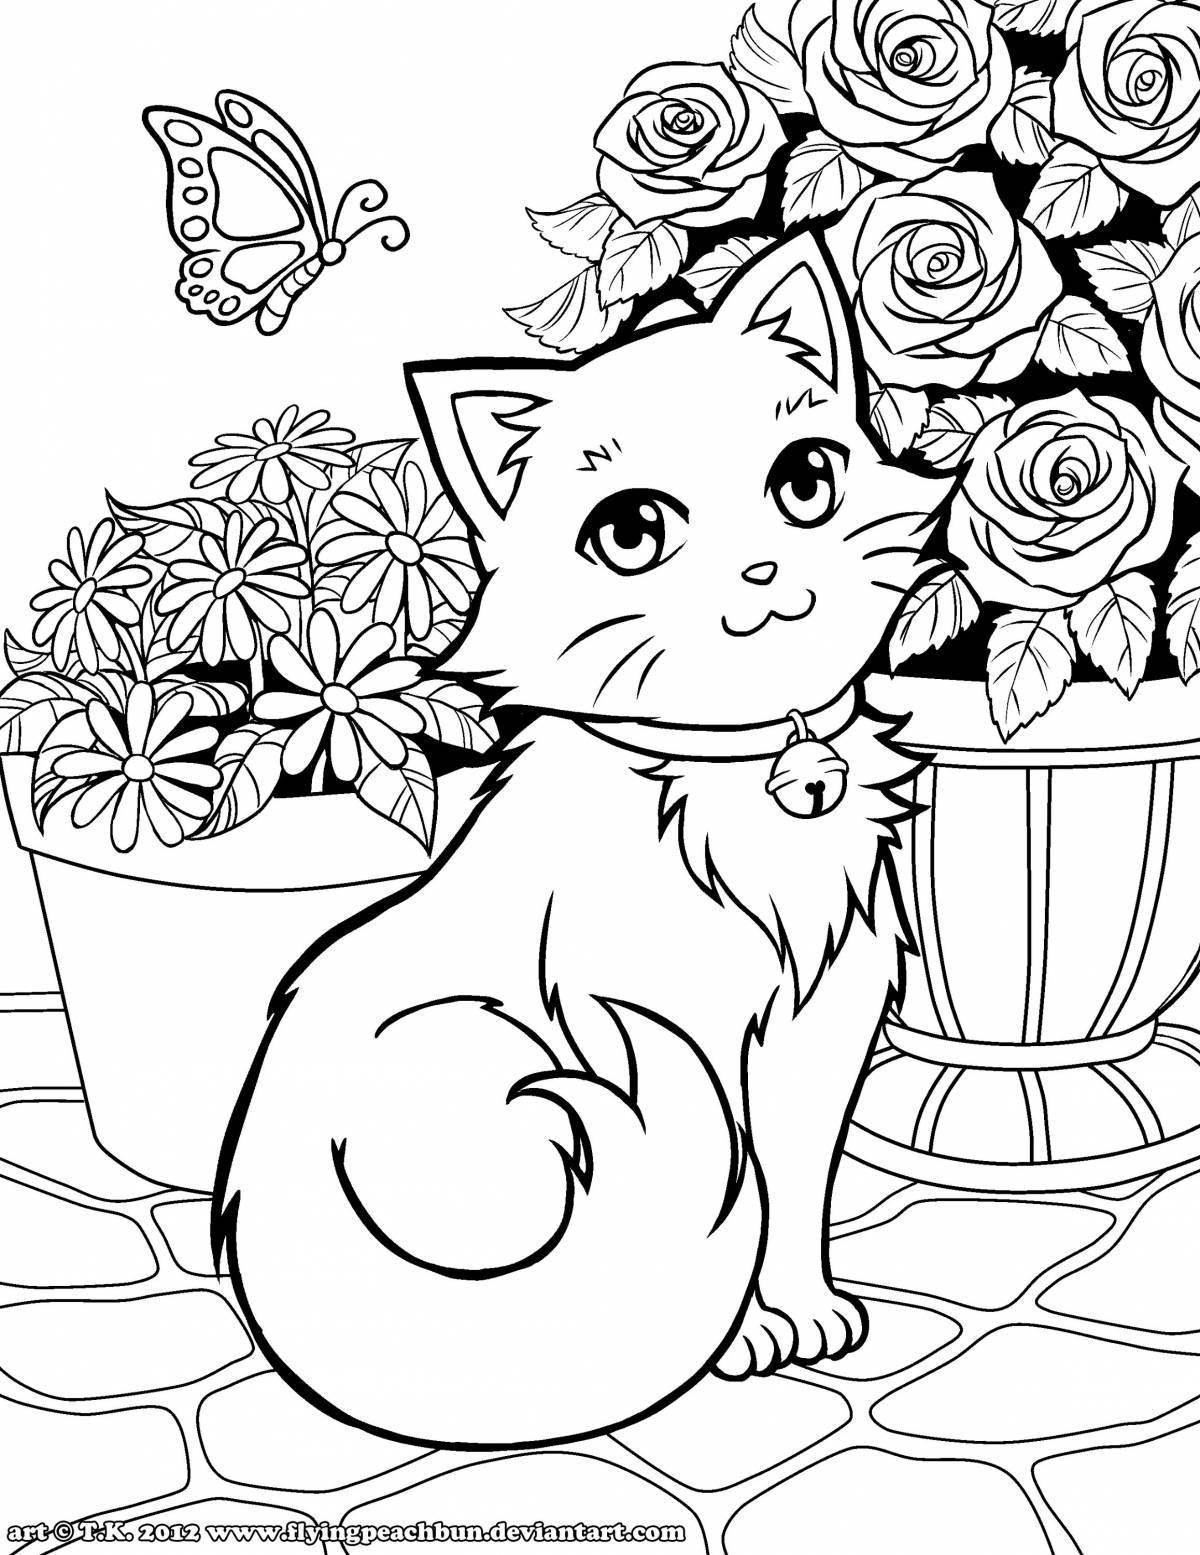 Silly kittens coloring book for 6-7 year olds